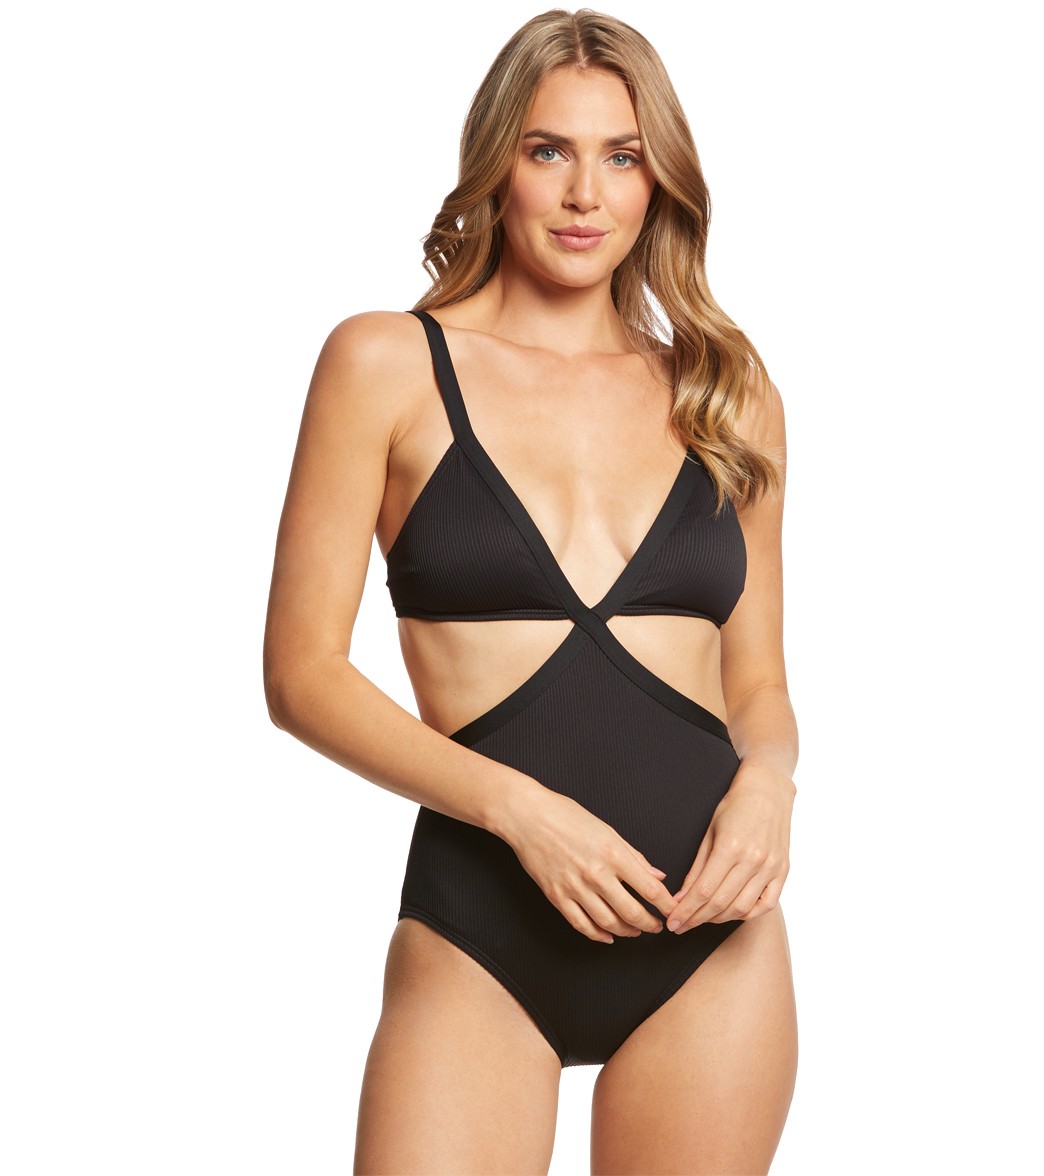 Kate Spade New York Marco Island Plunge V-Neck One Piece Swimsuit - Black X-Small - Swimoutlet.com